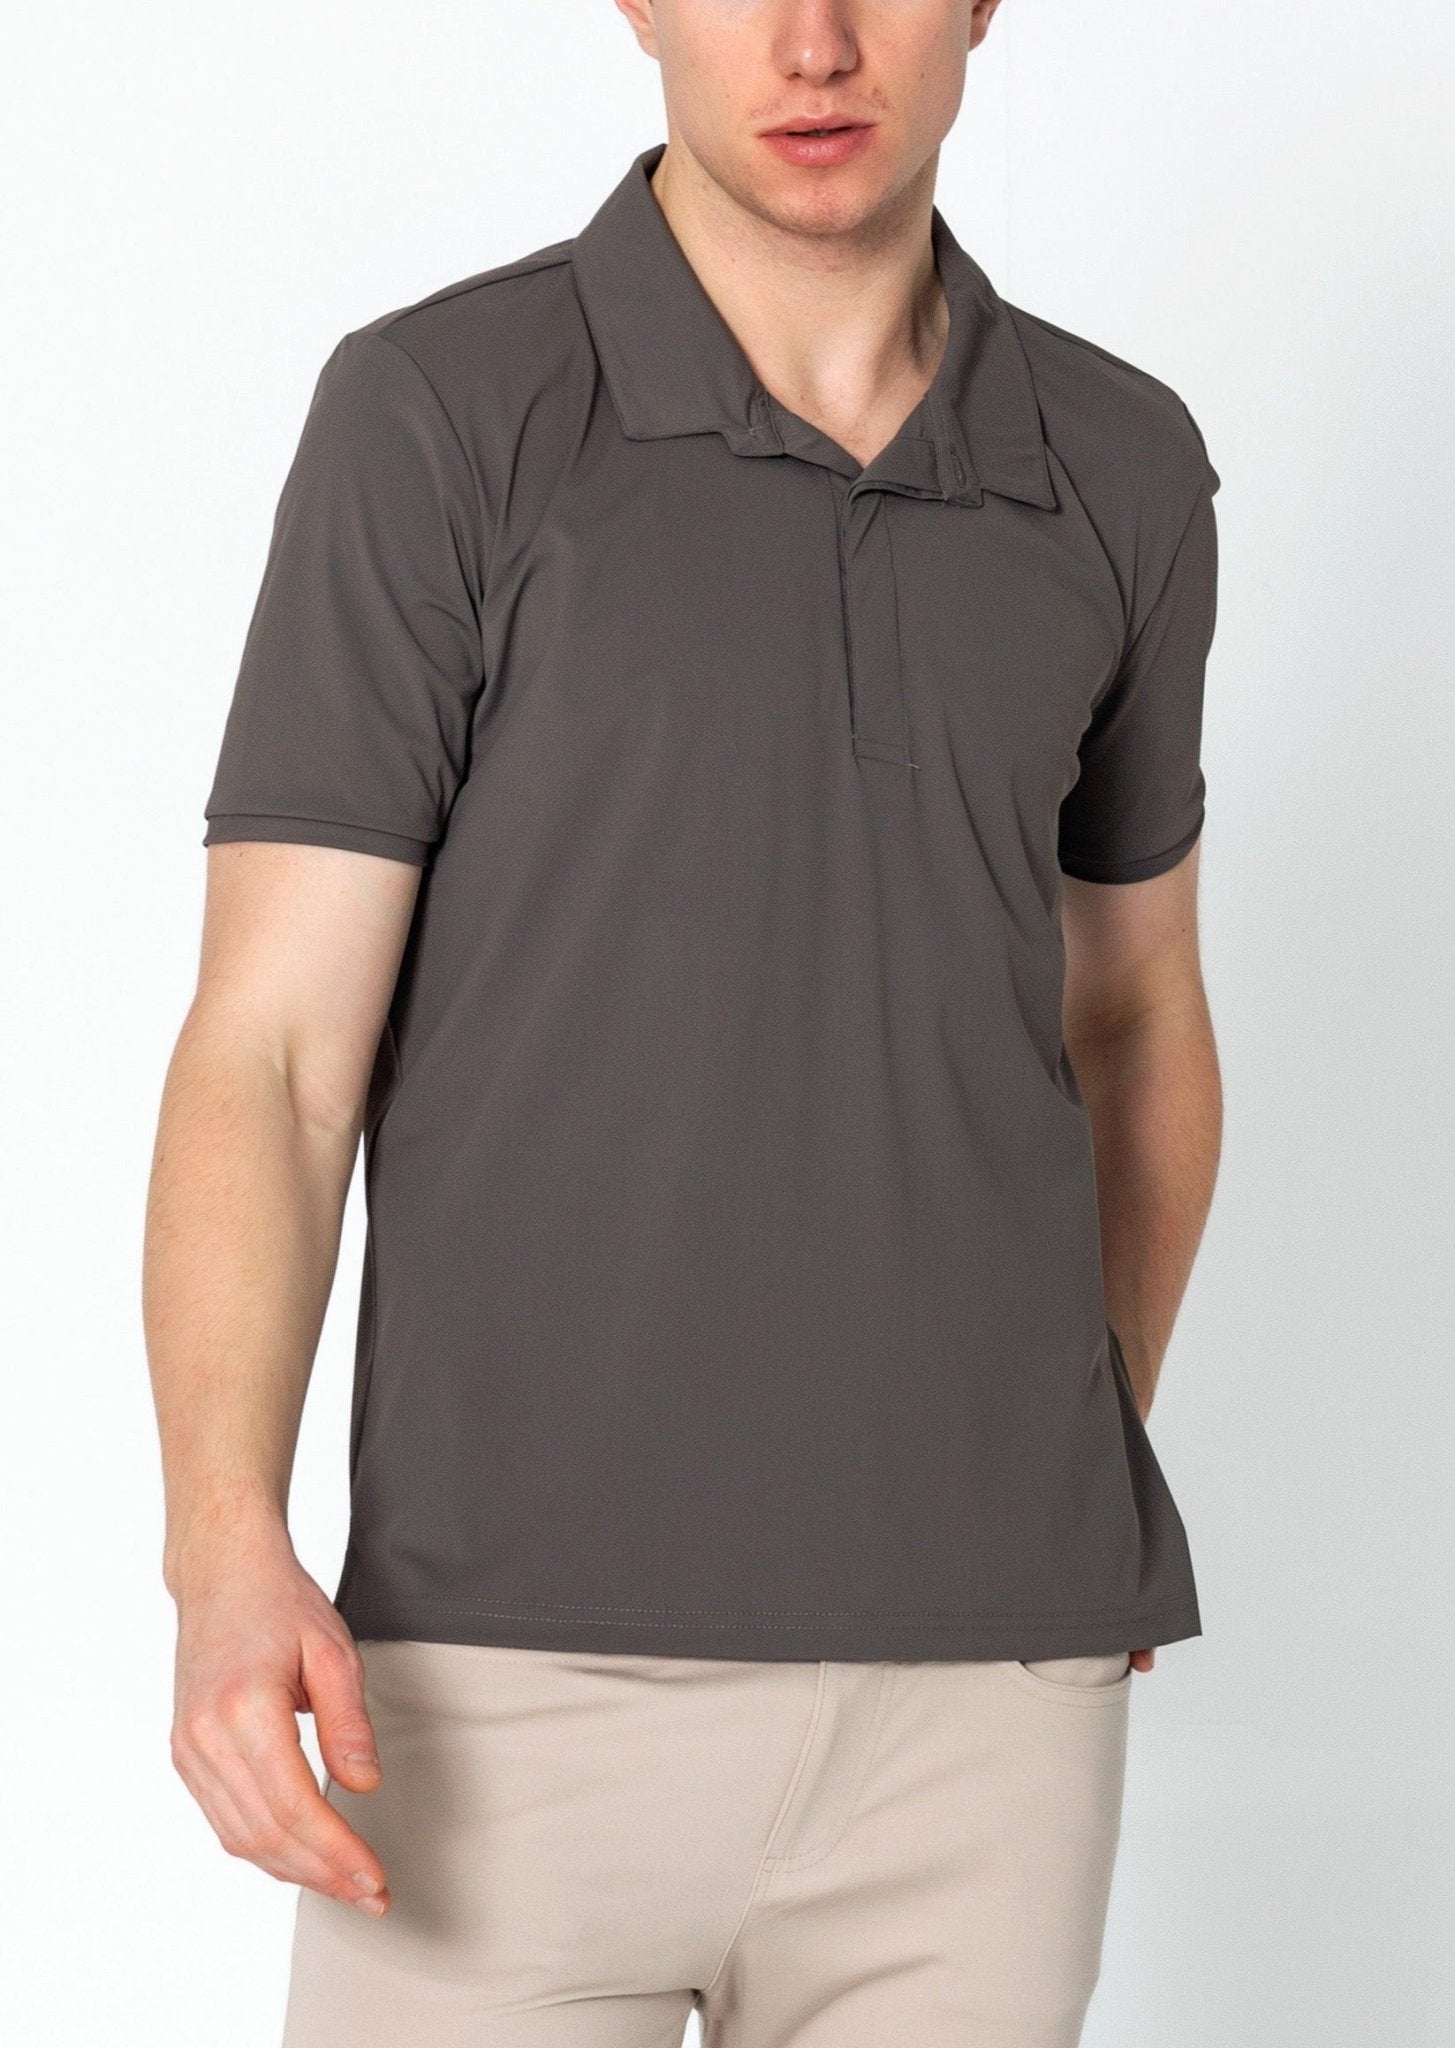 Wrinkle Free Tapered Travel Polo Shirts- Anthracite - Ron Tomson